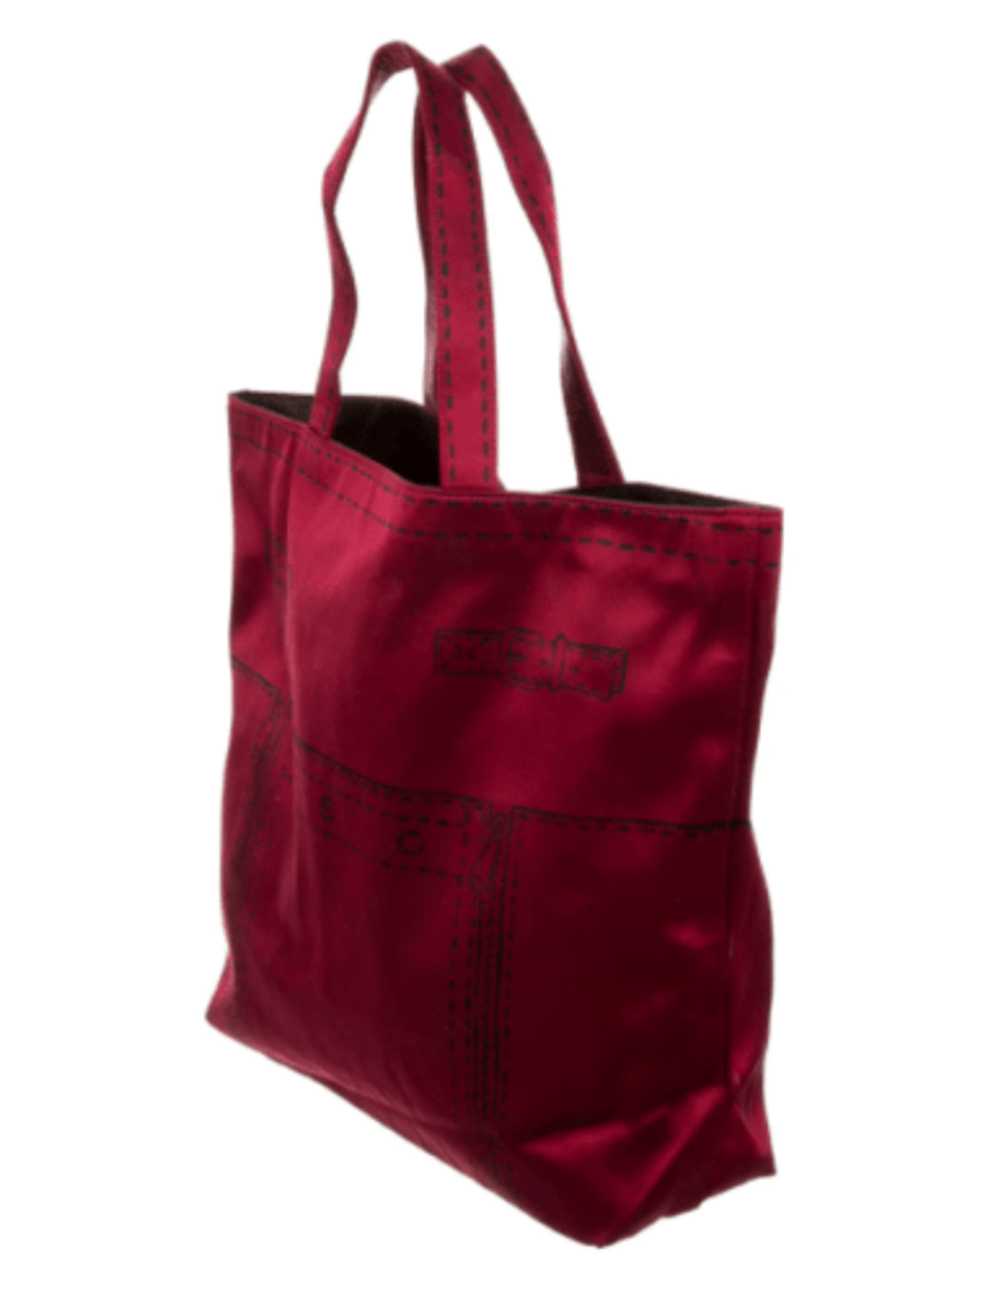 Yves Saint Laurent Red Wine Satin Tote - NWT - image 3